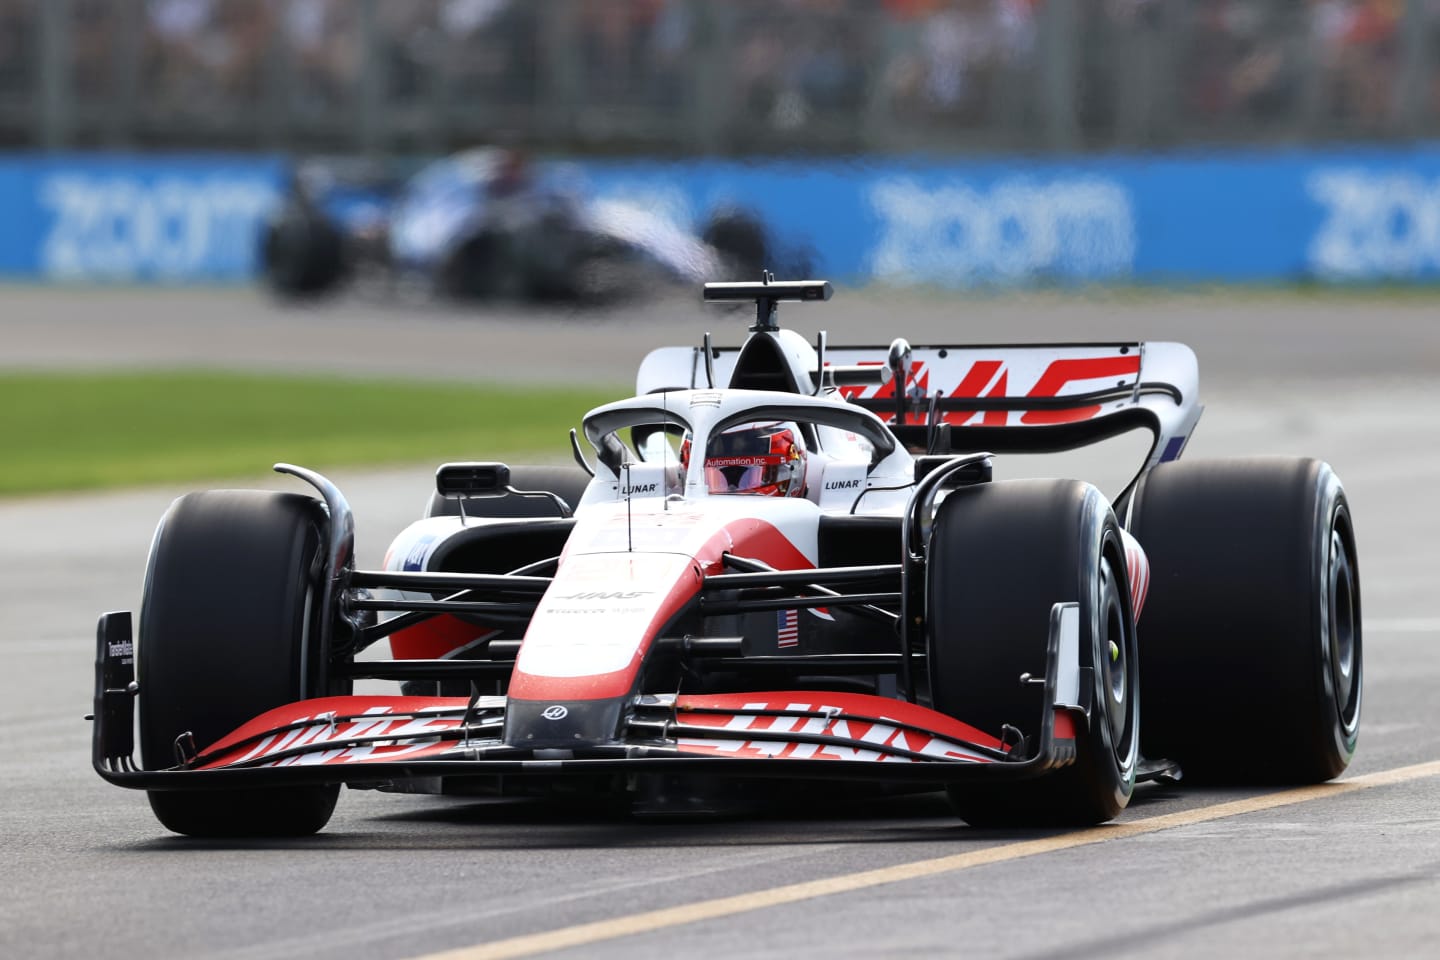 MELBOURNE, AUSTRALIA - APRIL 10: Kevin Magnussen of Denmark driving the (20) Haas F1 VF-22 Ferrari on track during the F1 Grand Prix of Australia at Melbourne Grand Prix Circuit on April 10, 2022 in Melbourne, Australia. (Photo by Robert Cianflone/Getty Images)